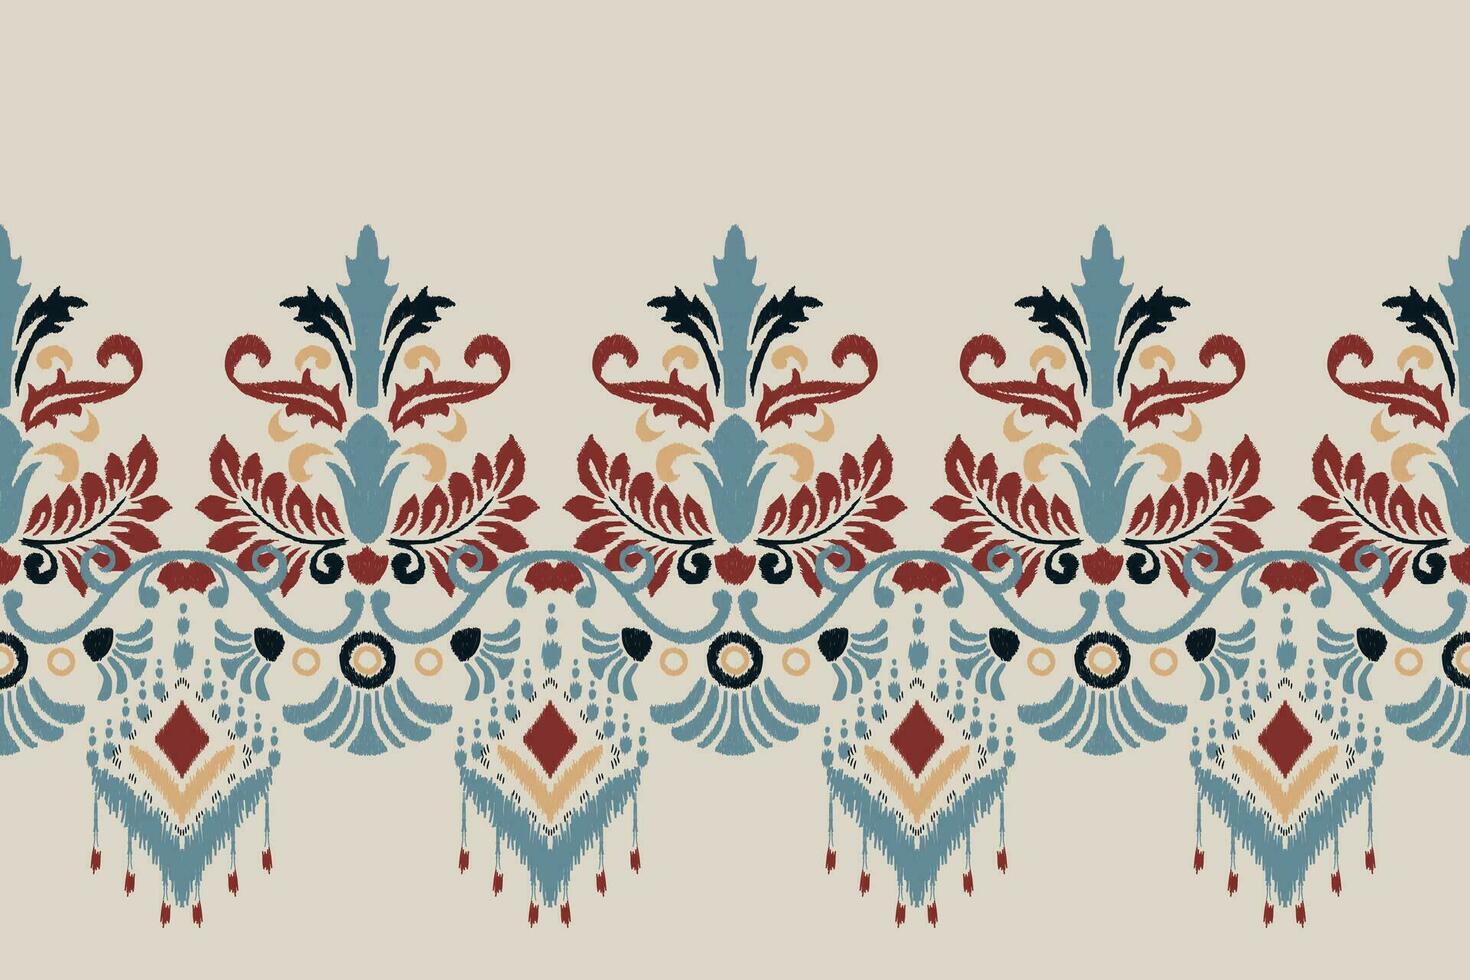 Ikat floral paisley embroidery on gray background.Ikat ethnic oriental pattern traditional.Aztec style abstract vector illustration.design for texture,fabric,clothing,wrapping,decoration,sarong,scarf.